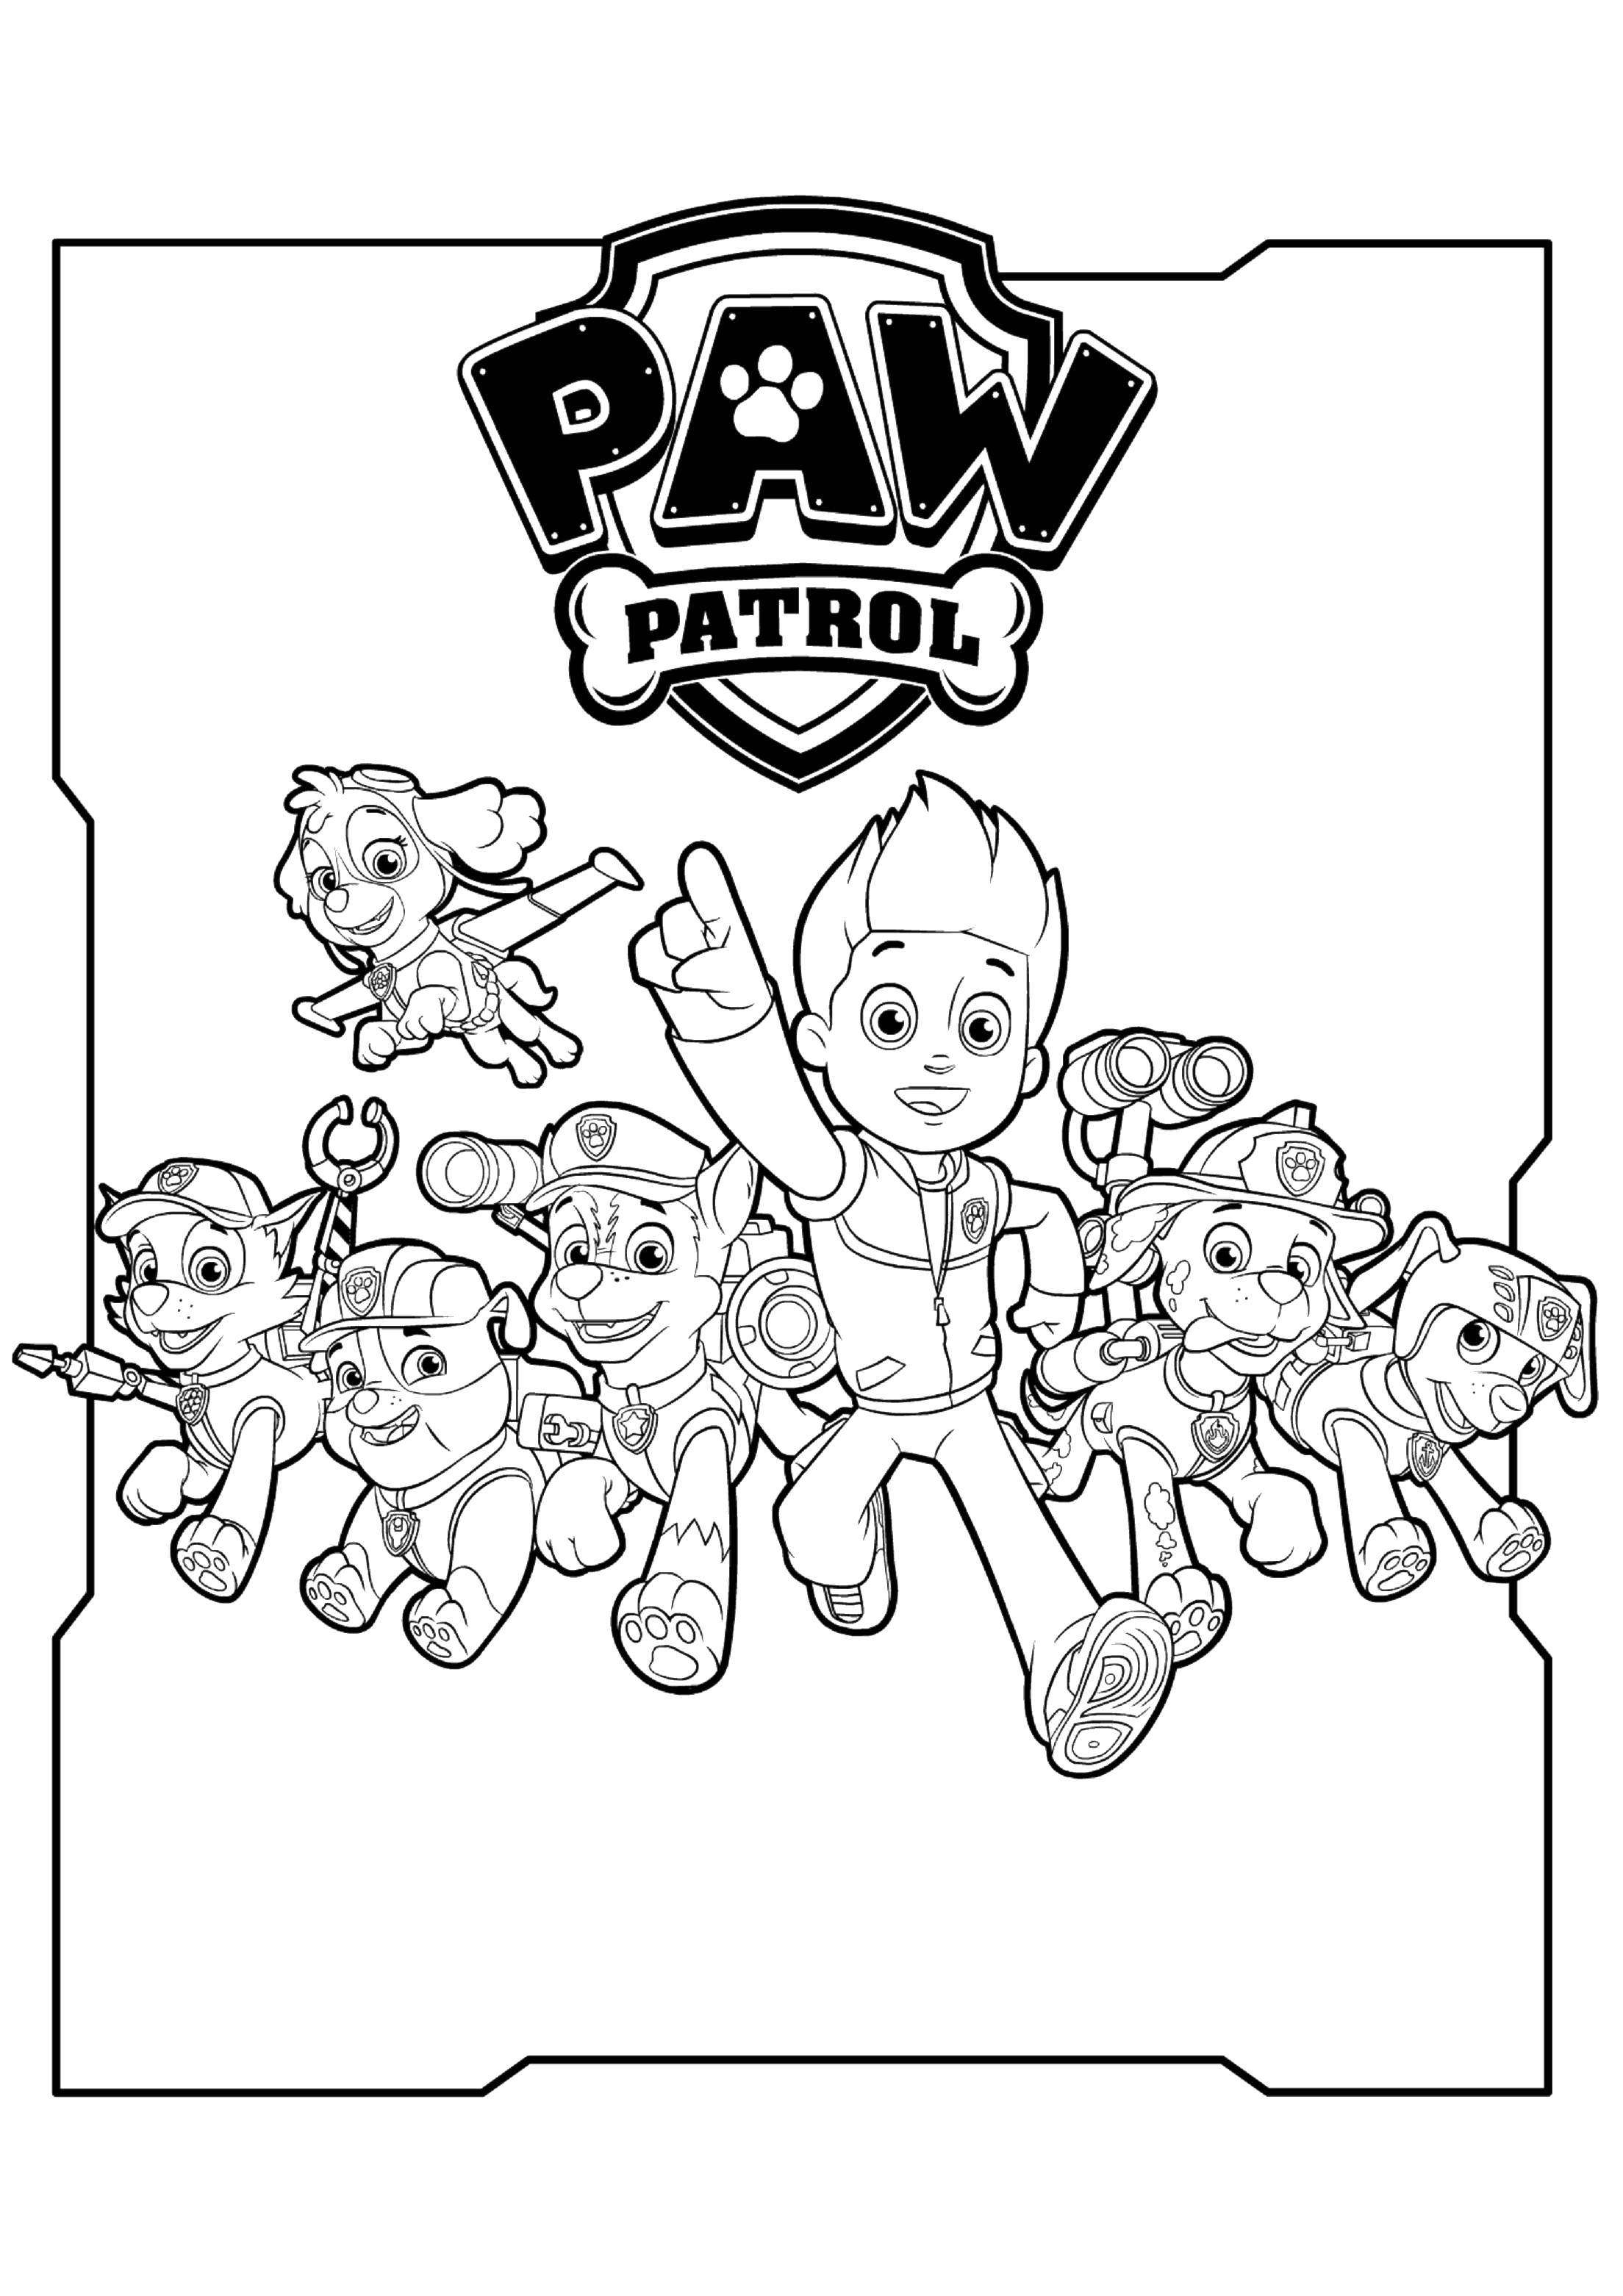 Coloring Puppy. Category paw patrol. Tags:  Paw patrol.